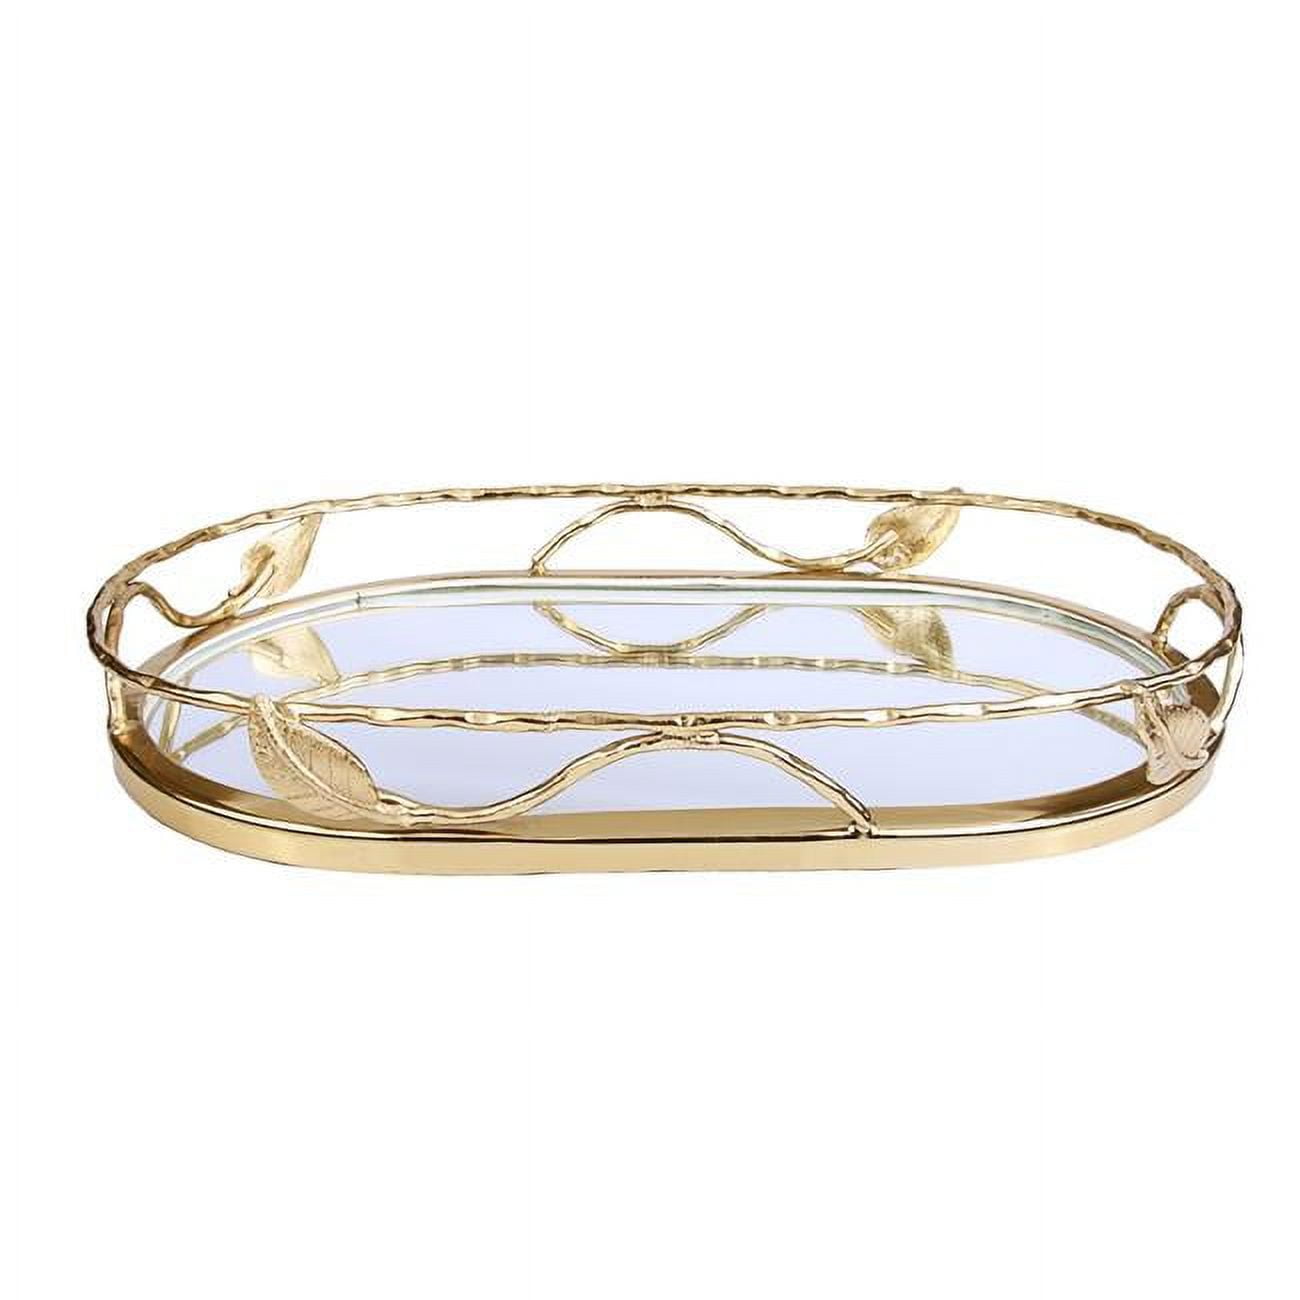 Classic Touch MT950G Gold Oval Mirror Tray, 16 x 10.25 x 2 in -  Classic Touch Decor